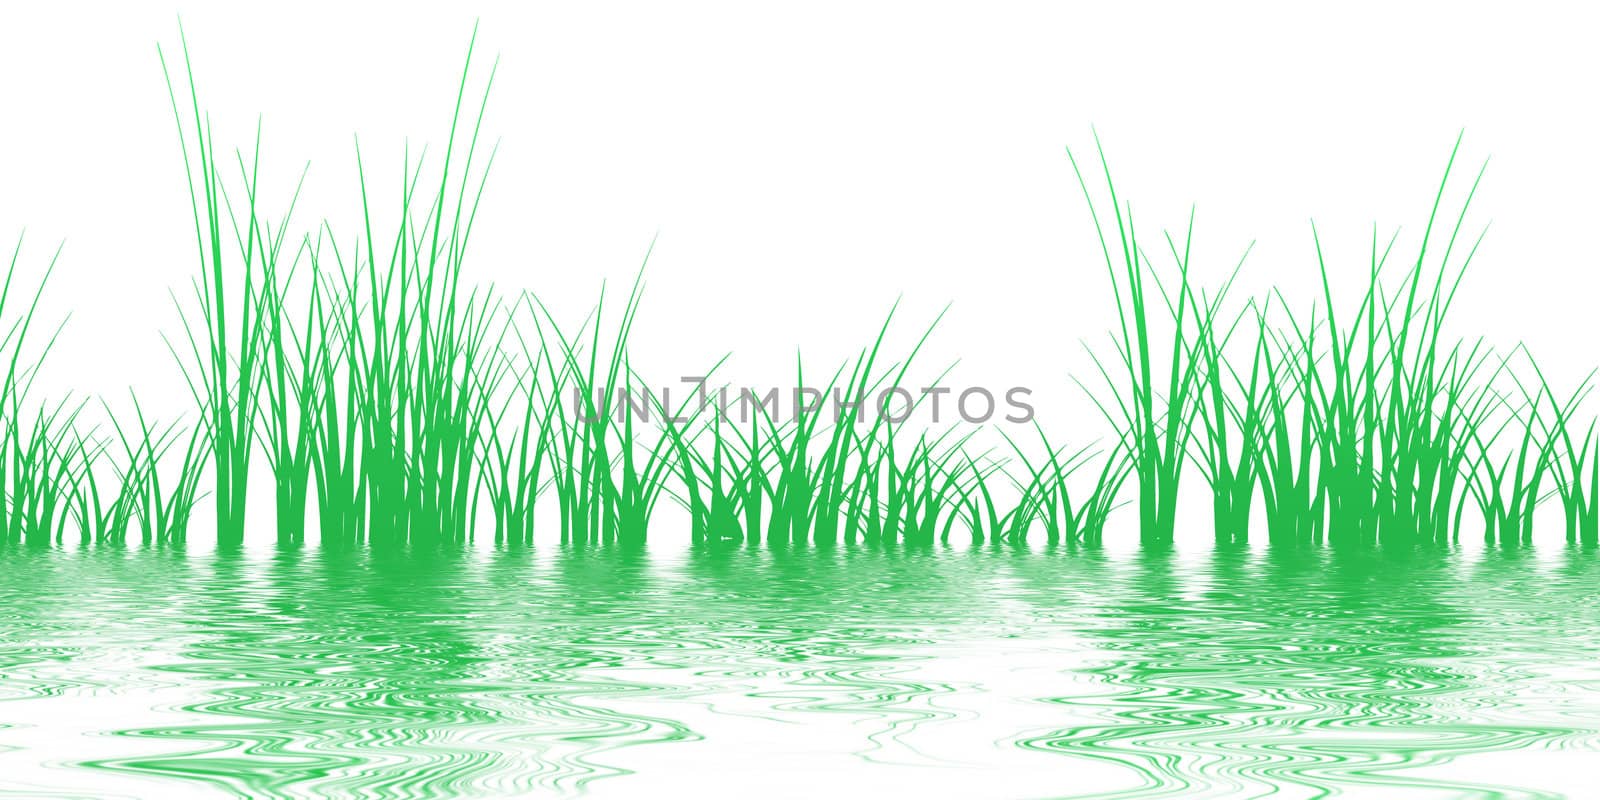 Grass on the water by MartMartov